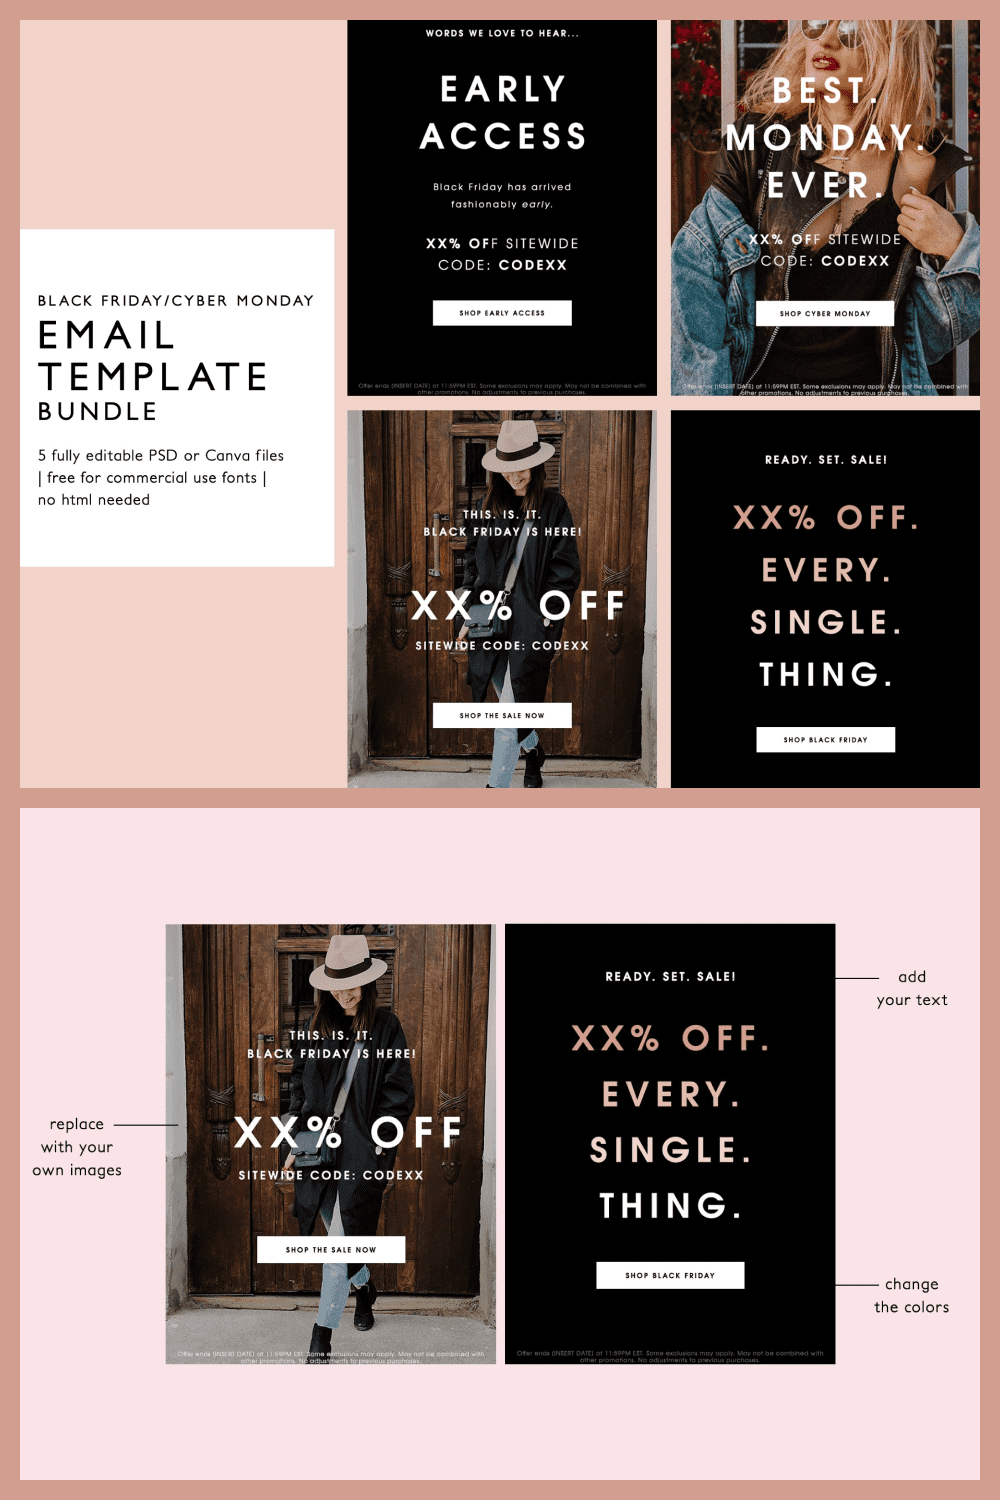 Black Friday and Cyber Monday Email Template Bundle.